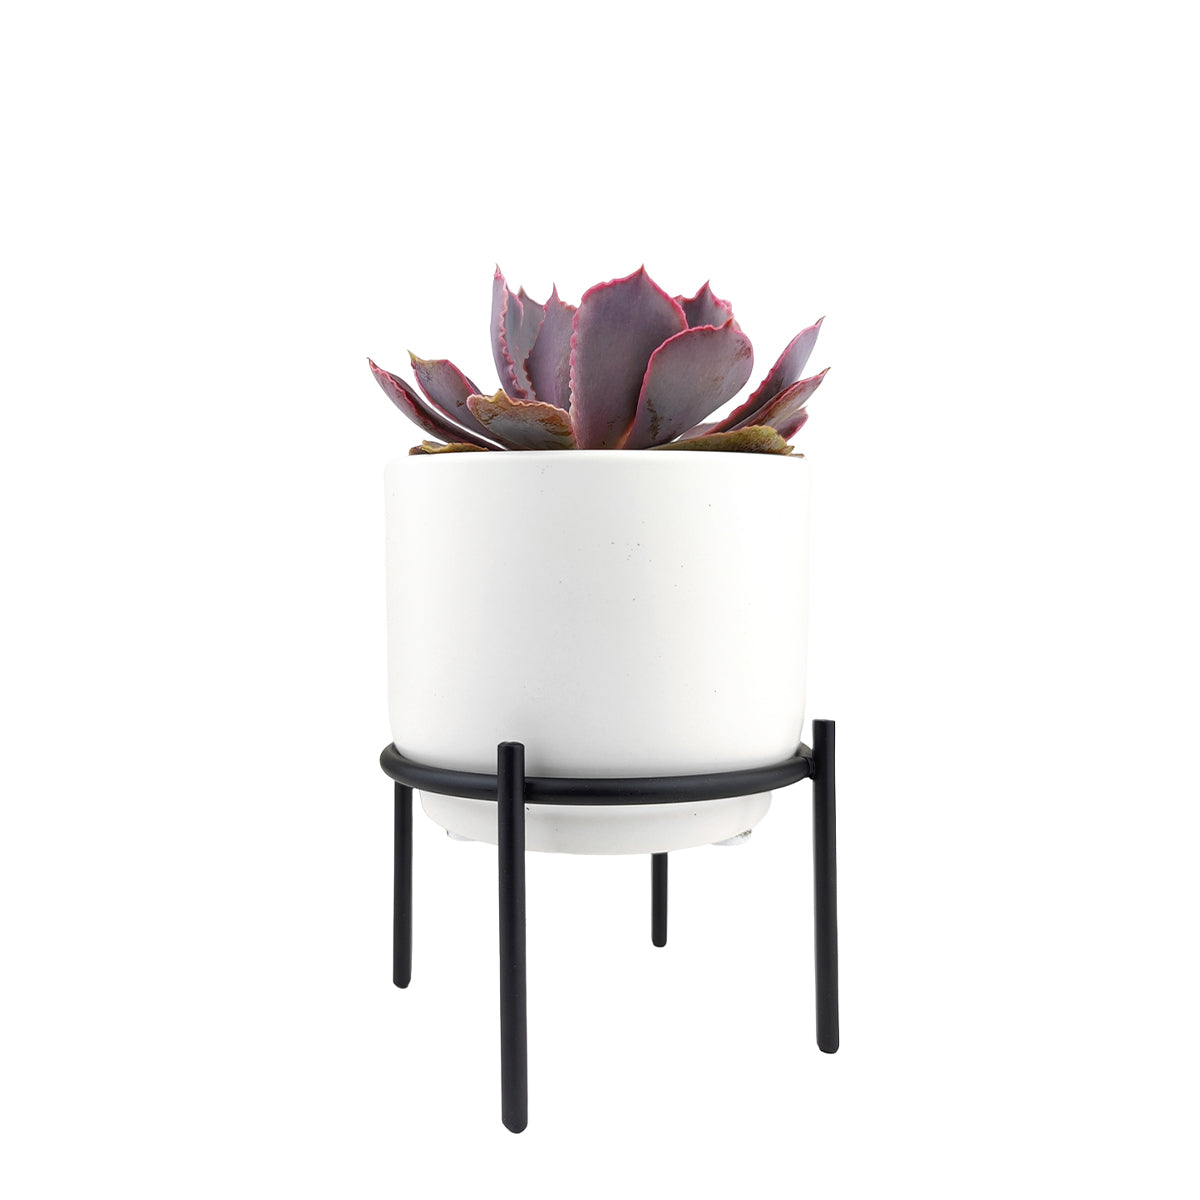 4 inch White Ceramic Planter with Stand for Succulent & Houseplant, White Planter with Stand for Sale, Buy 4 inch White Ceramic Pot with Black Metal Stand for Indoor Corner and Outdoor Plants